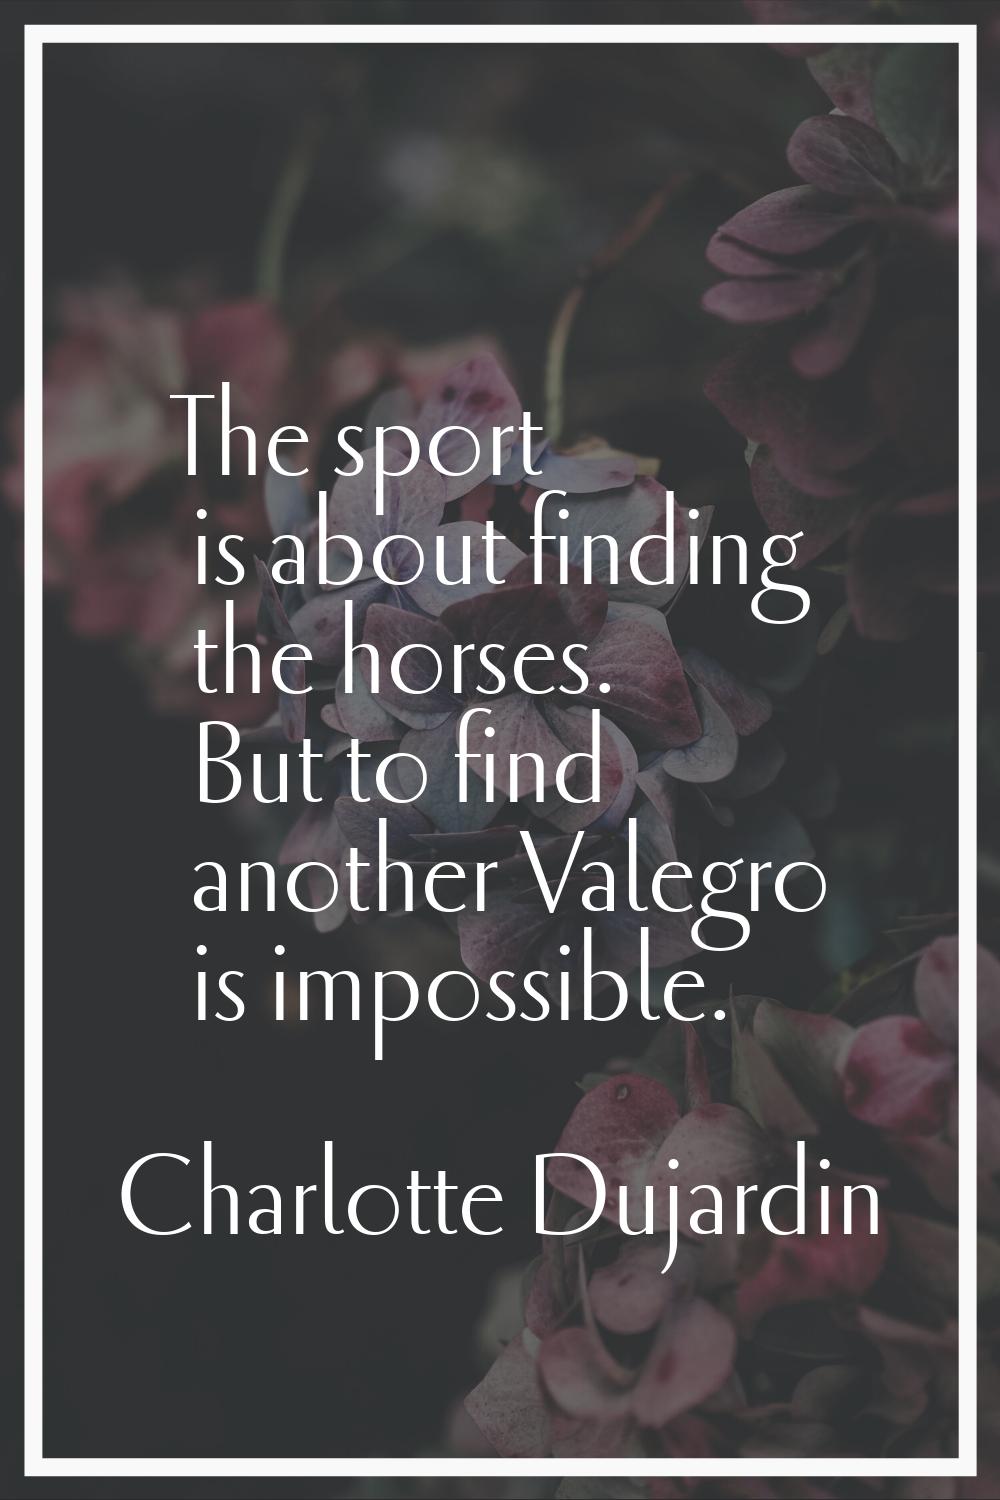 The sport is about finding the horses. But to find another Valegro is impossible.